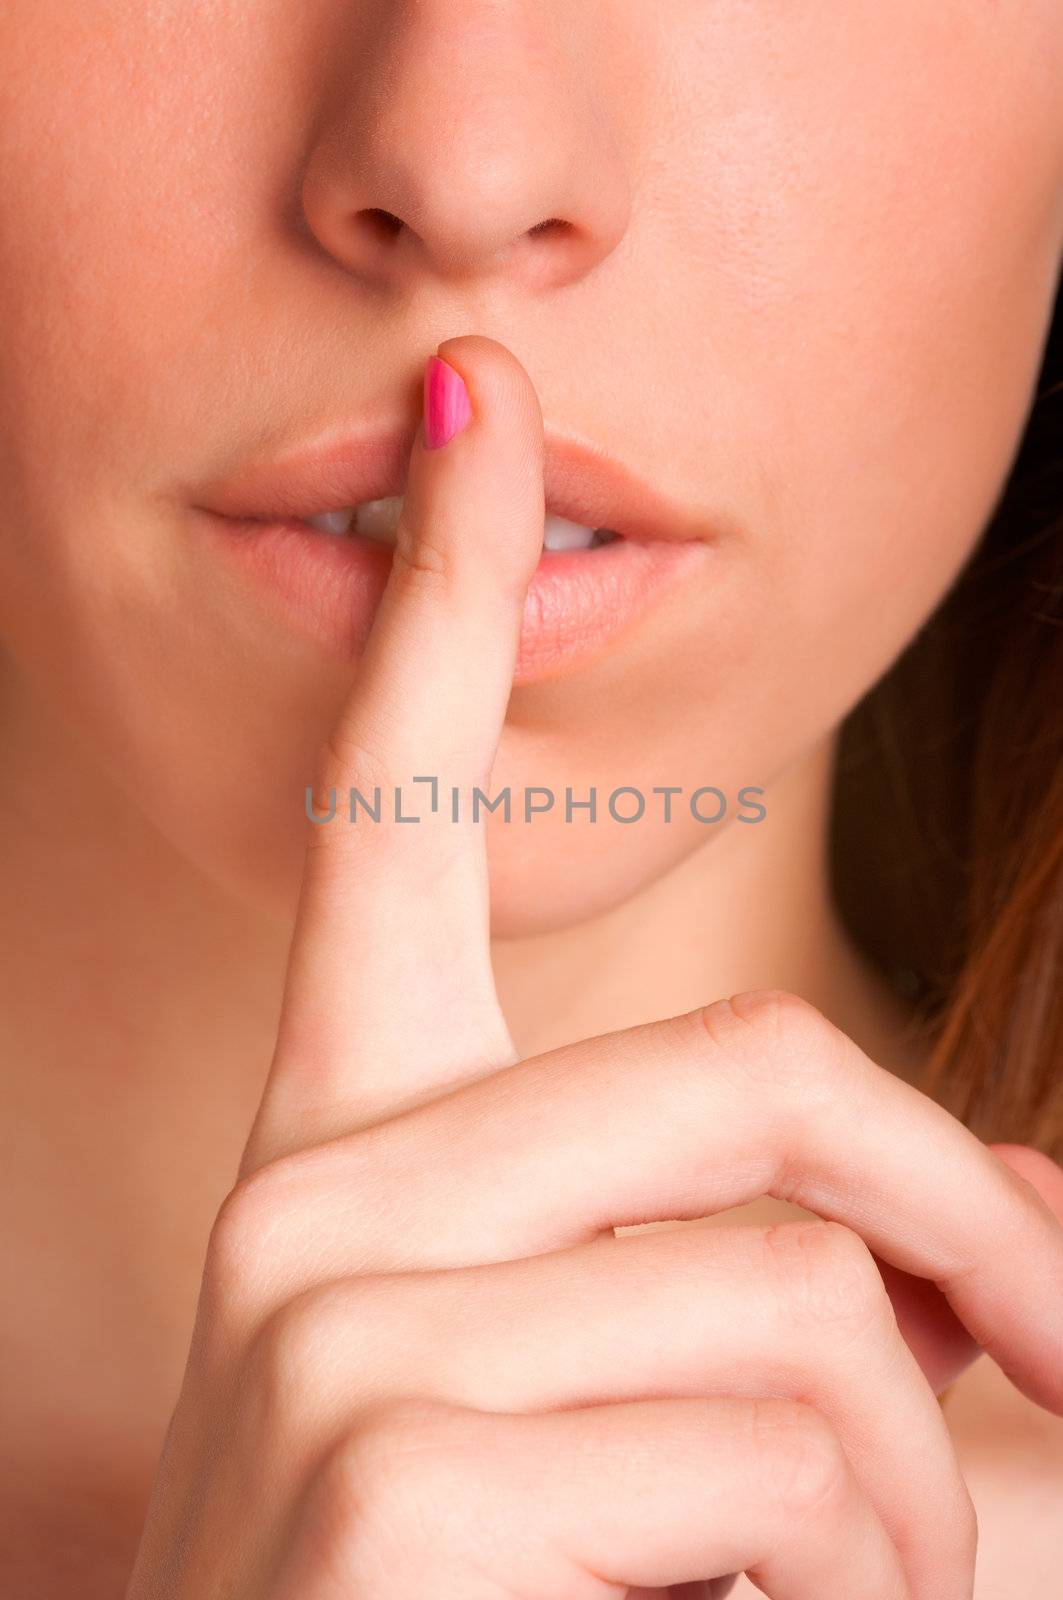 Young girl with her finger over her mouth